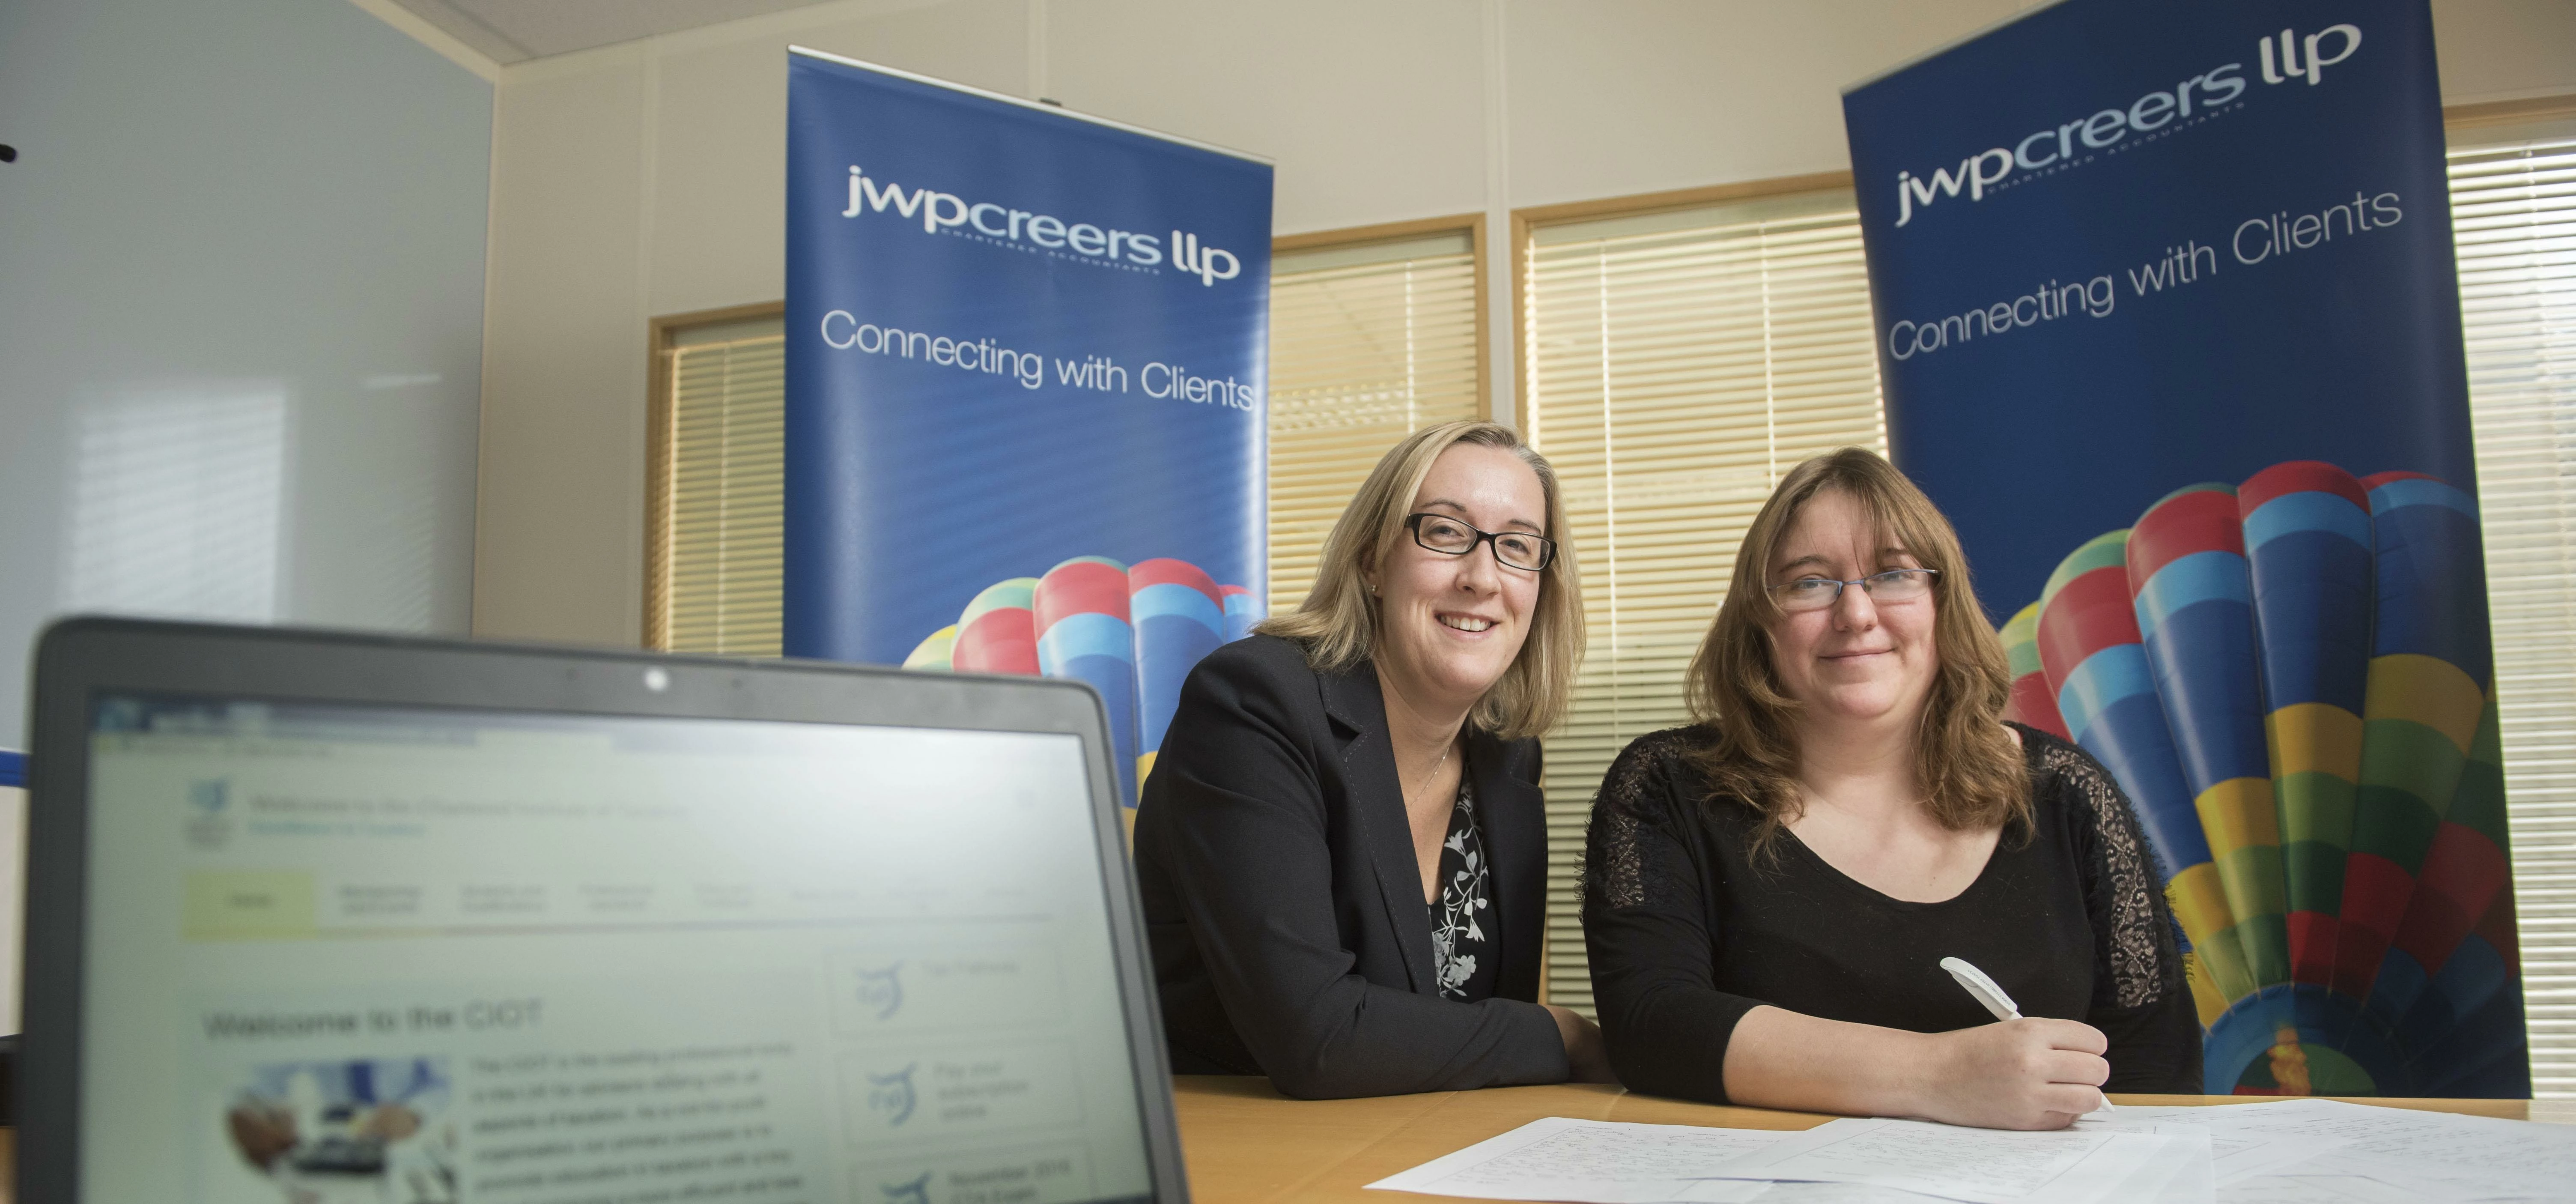 THE ANSWERS HAVE IT:  JWP Creers assistant tax manager, Laura Train, (right) with training partner, 